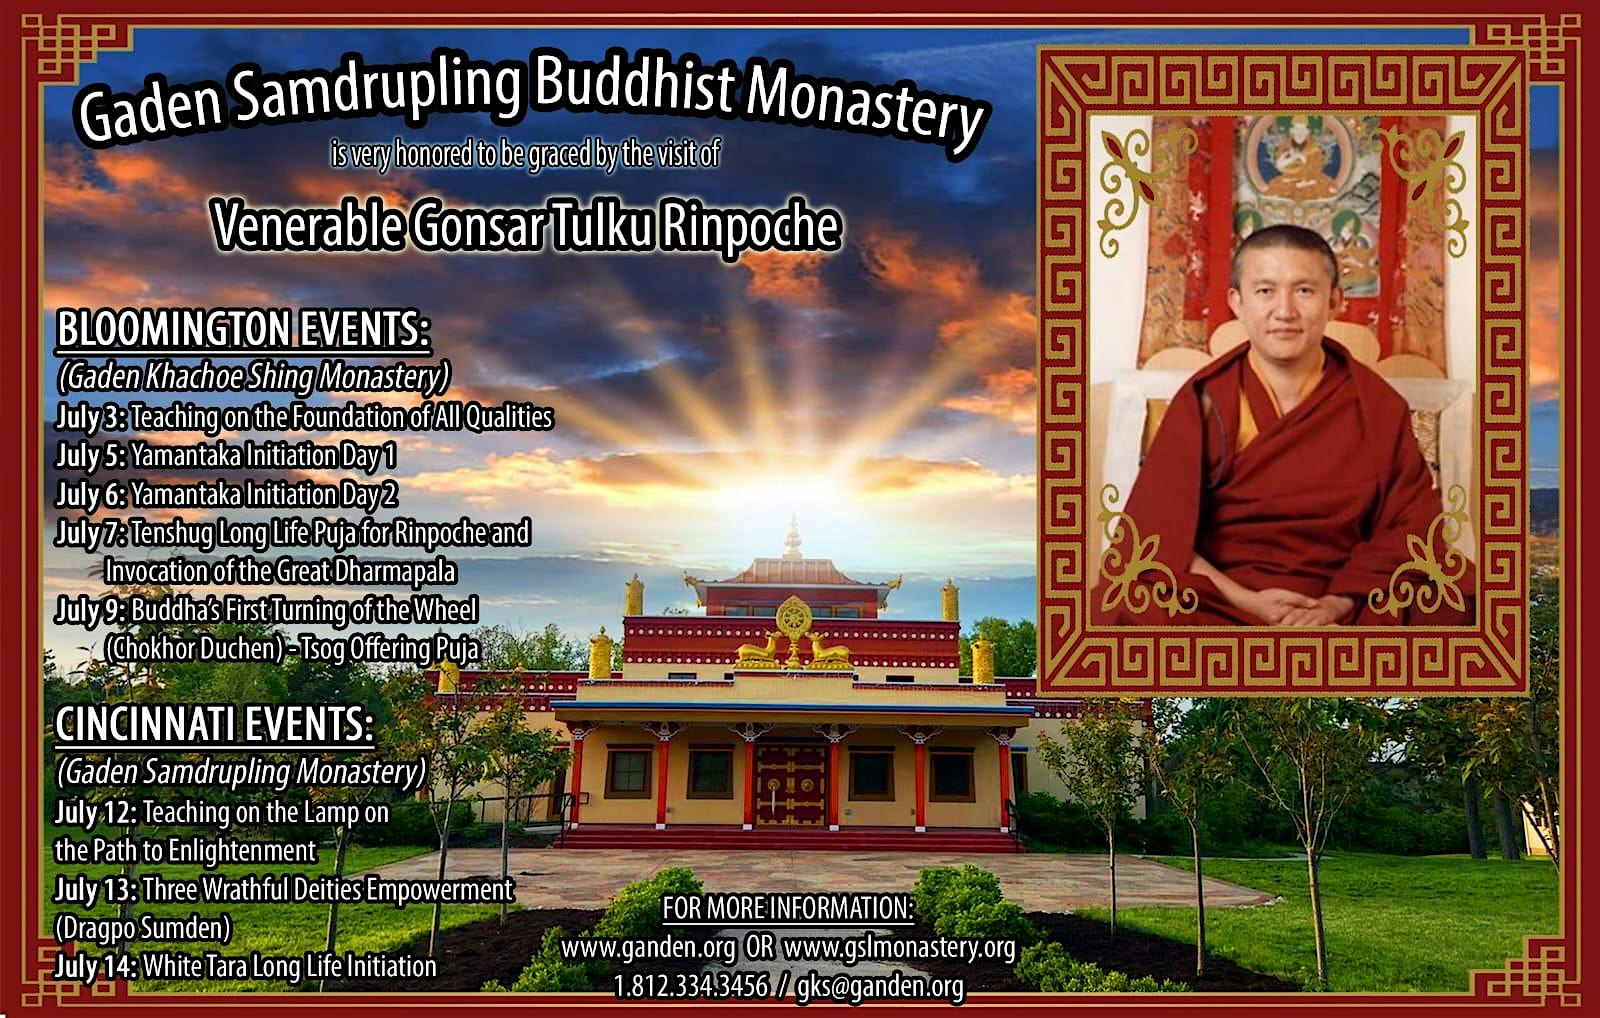 Revered Buddhist Teacher offers Teachings and Initiation at Monastery